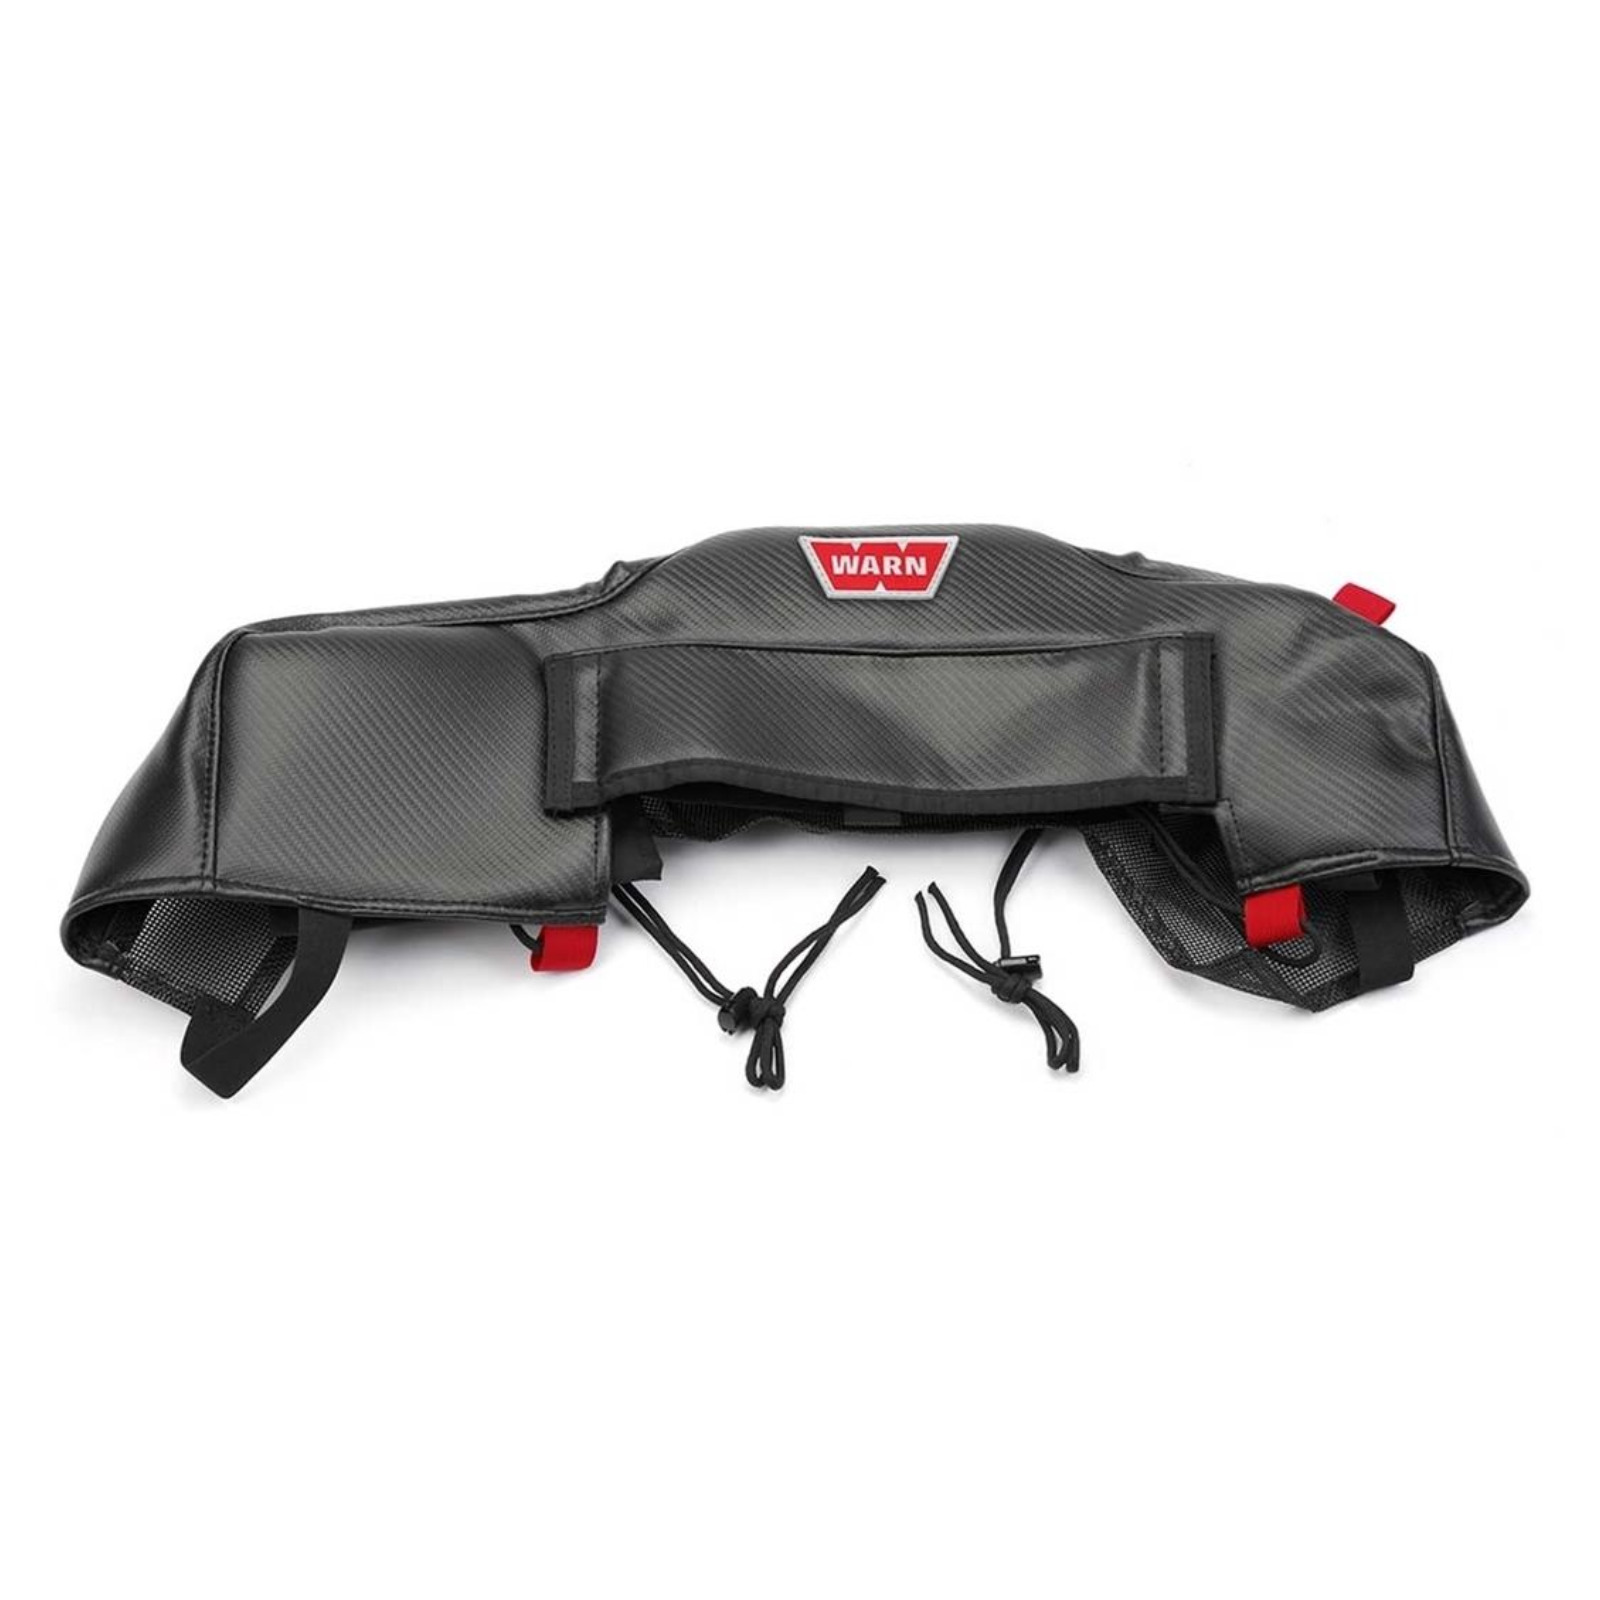 Warn 107765 Stealth Winch Cover for VR8 VR10 VR12 EVO Winches